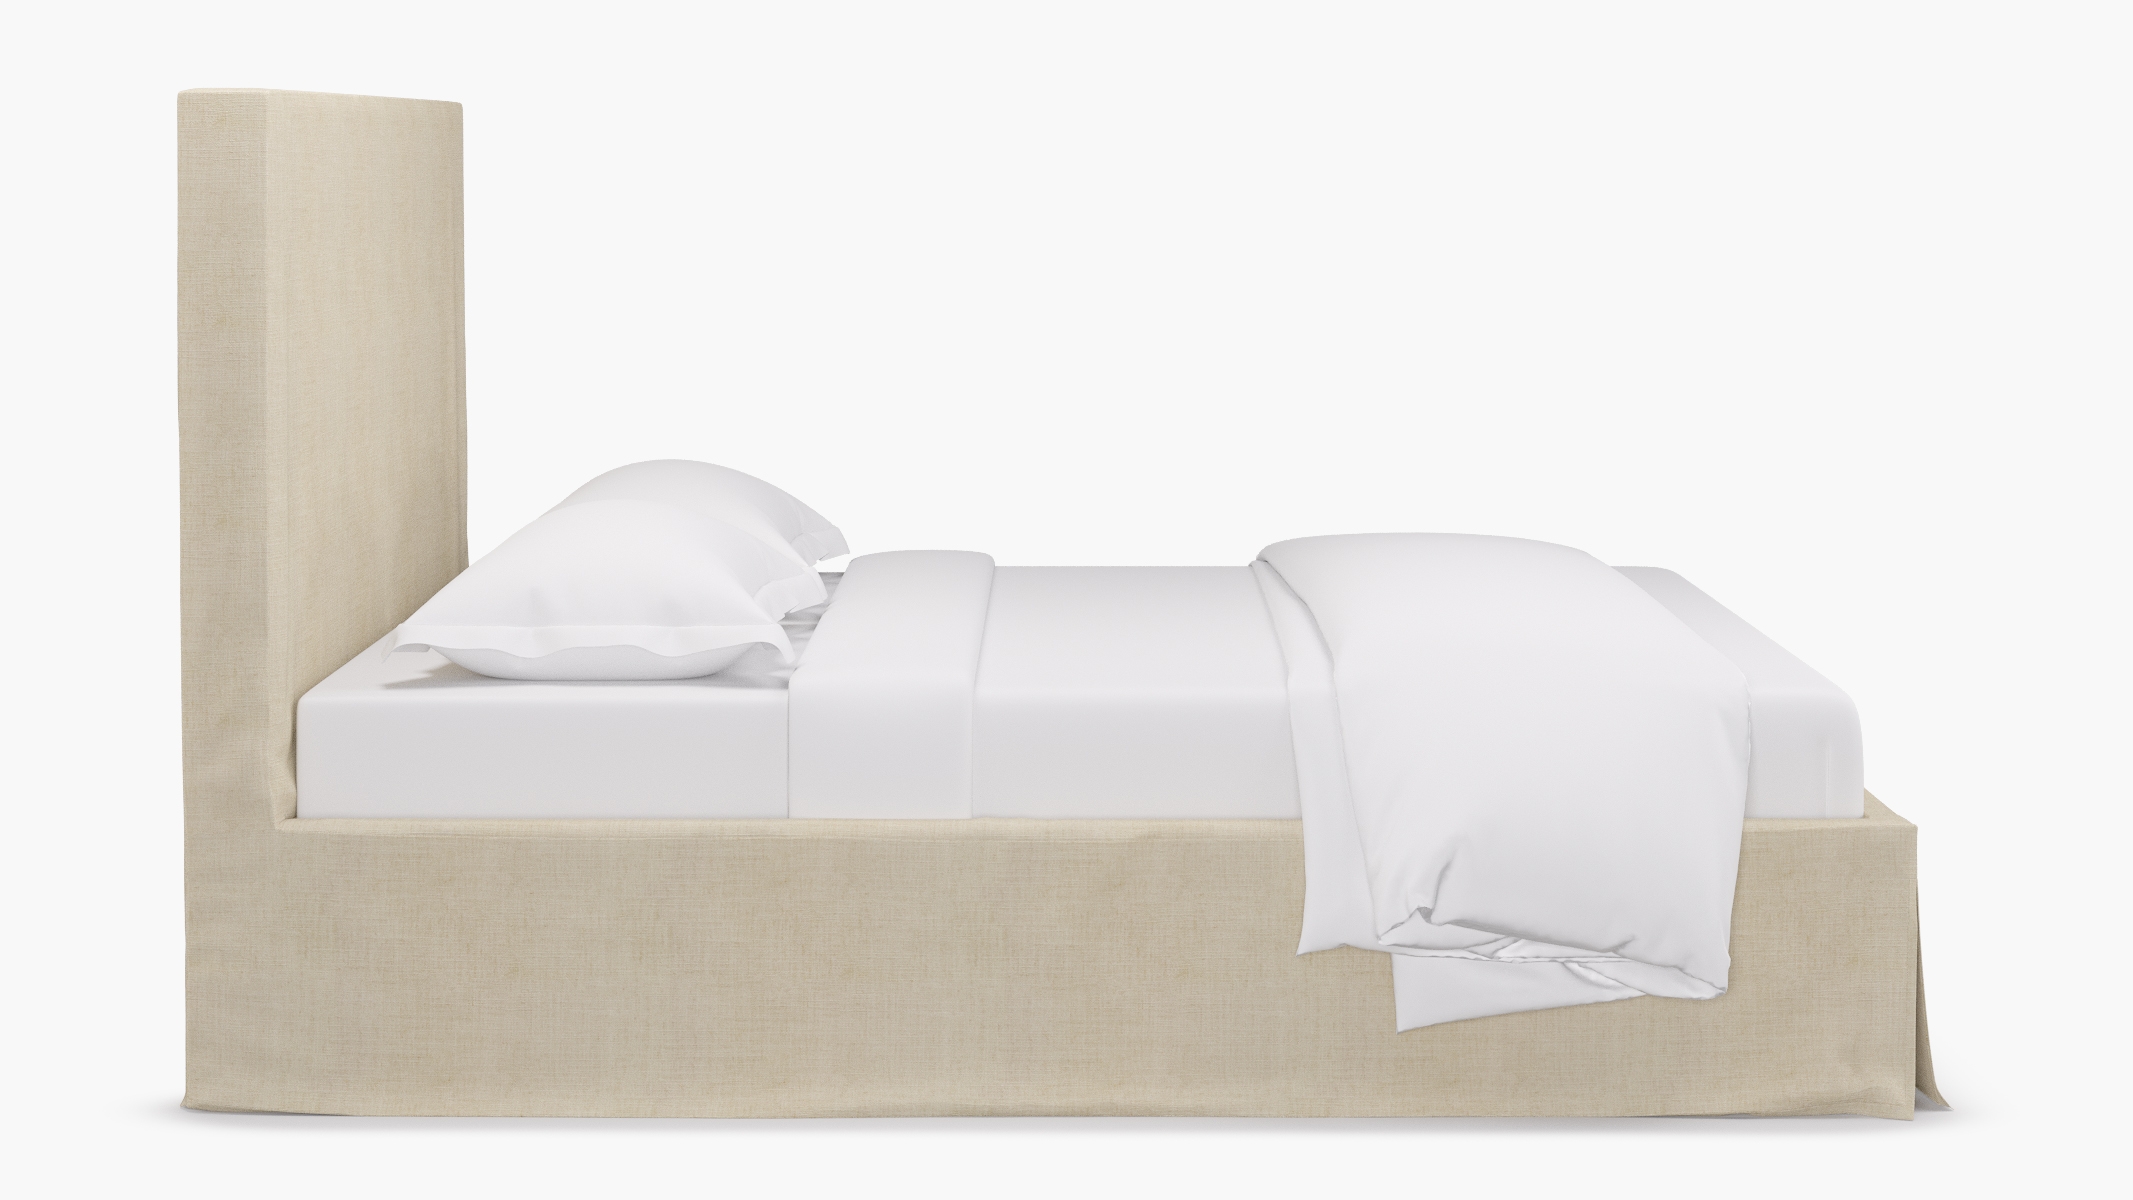 Slipcovered Bed, Talc Everyday Linen, King - Image 2